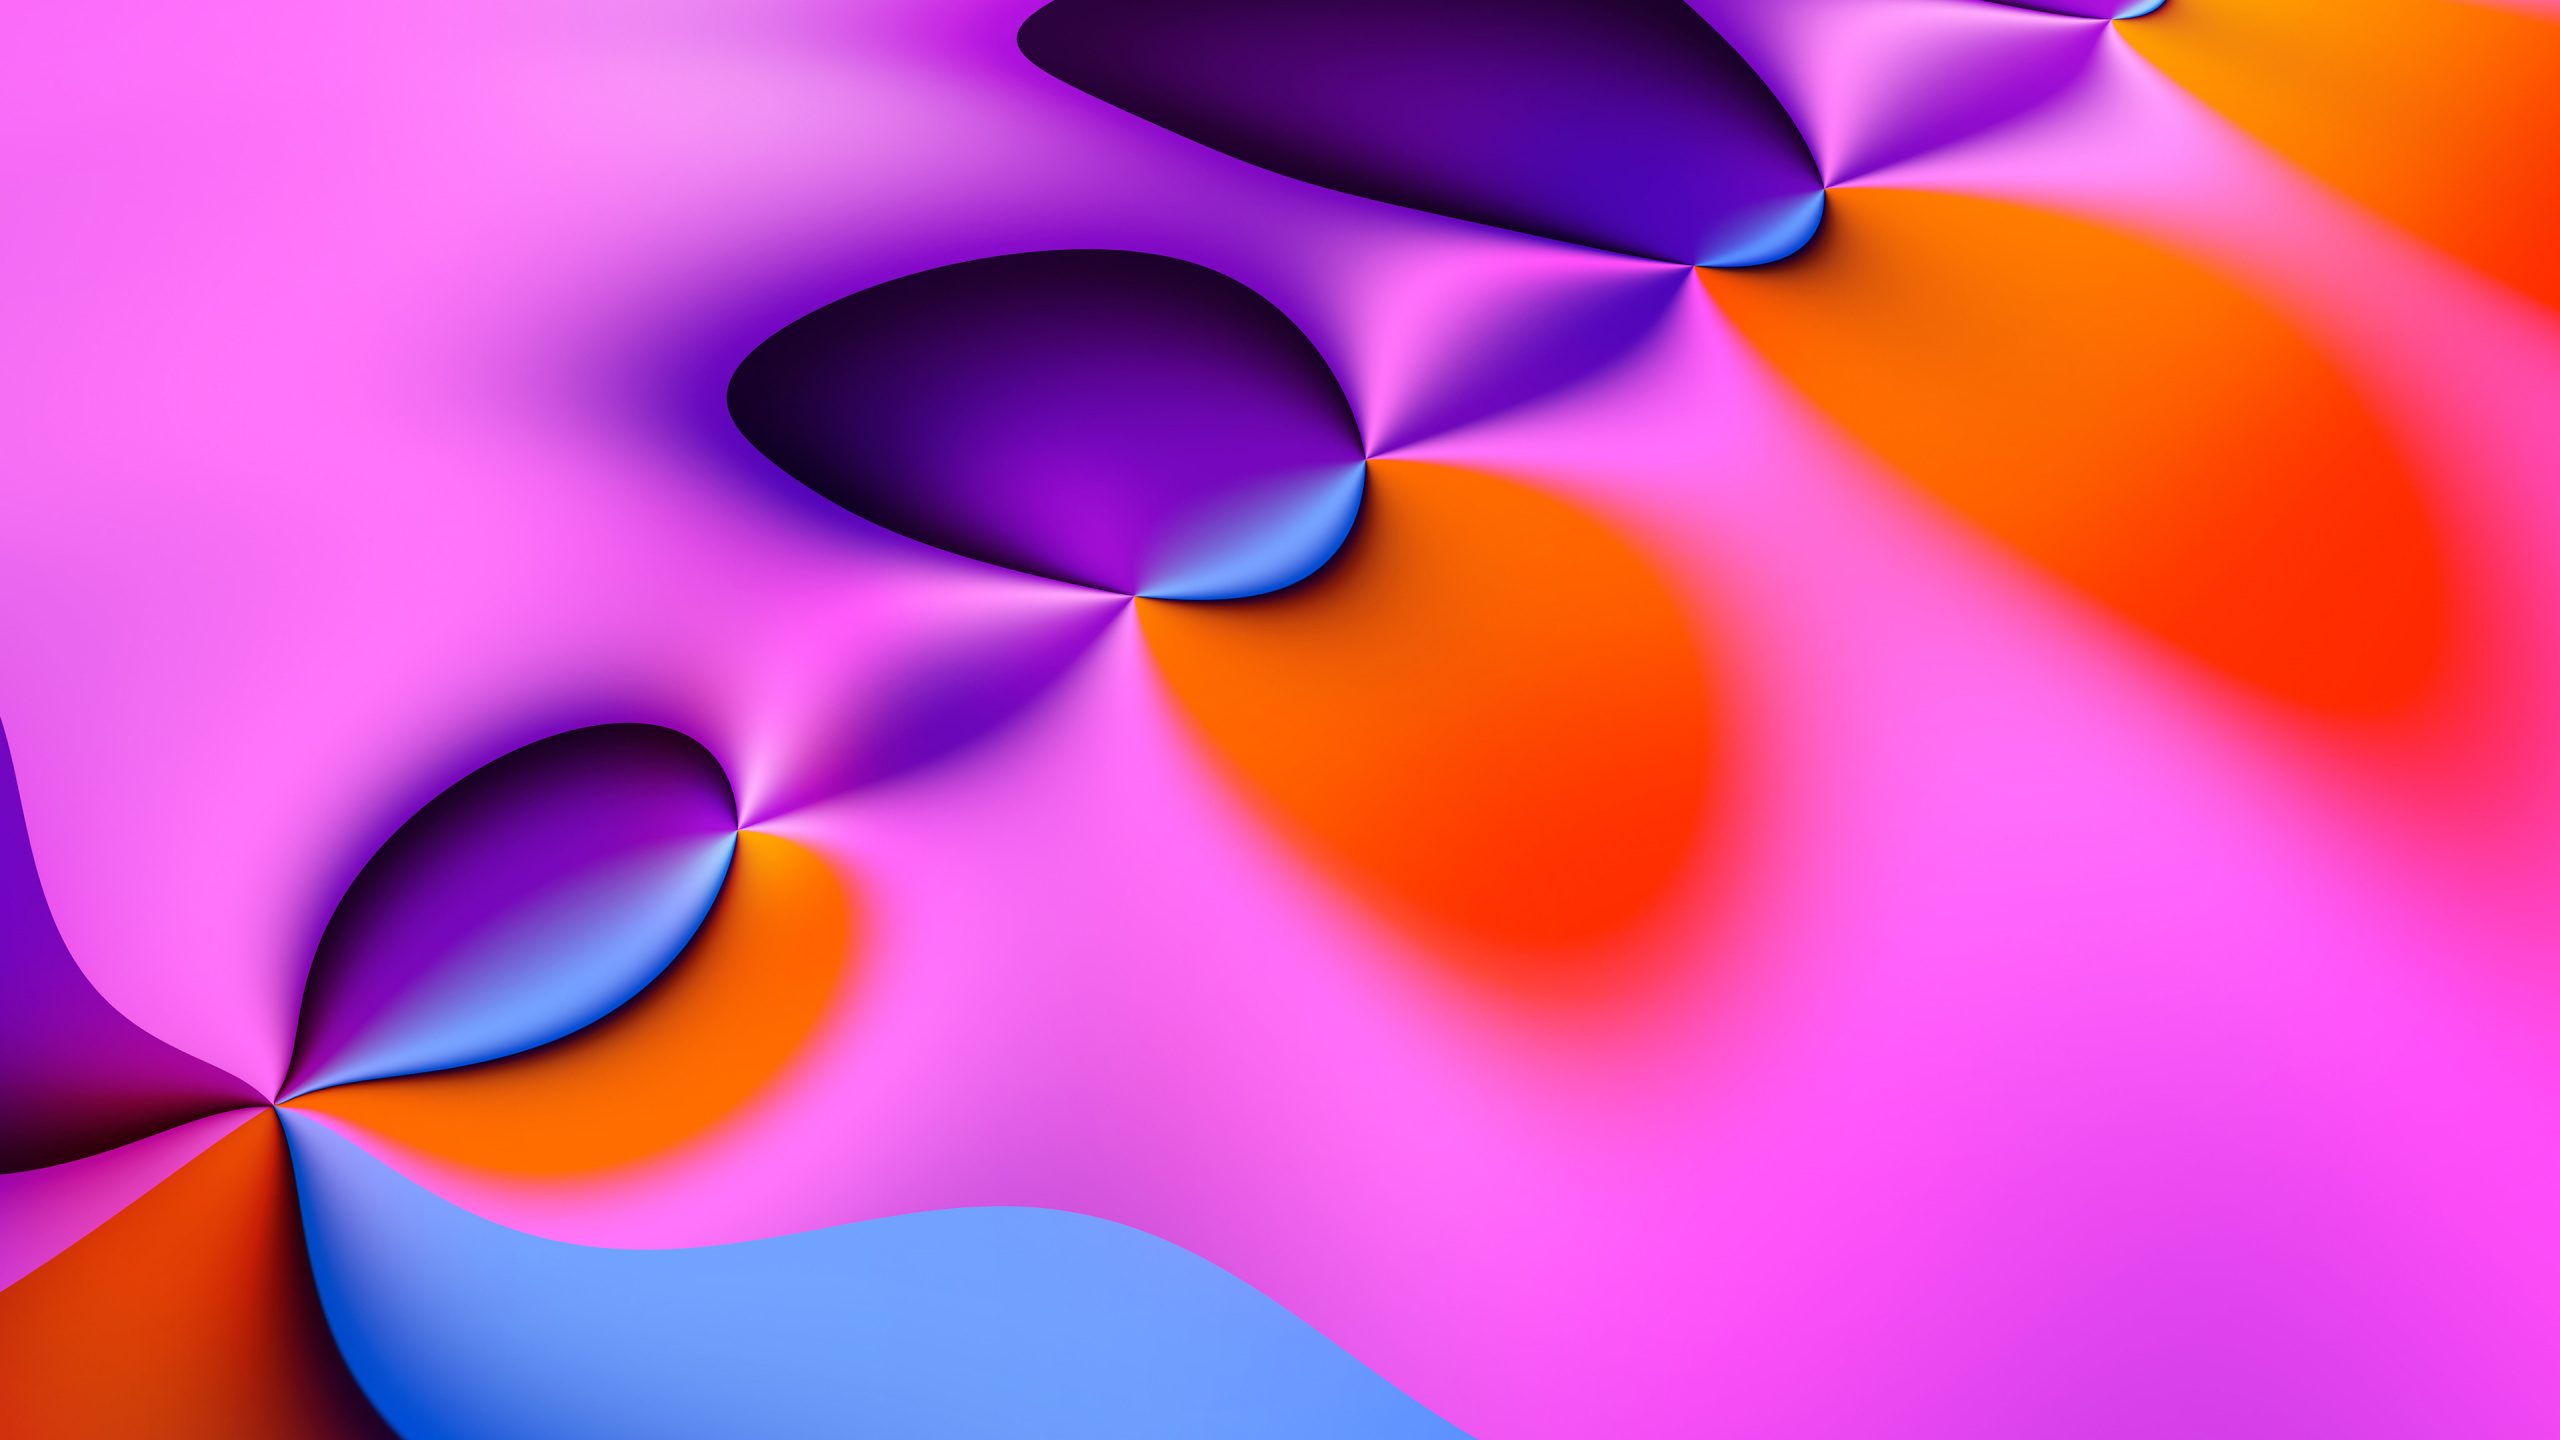 Purple Orange and Yellow Abstract Painting. Wallpaper in 2560x1440 Resolution